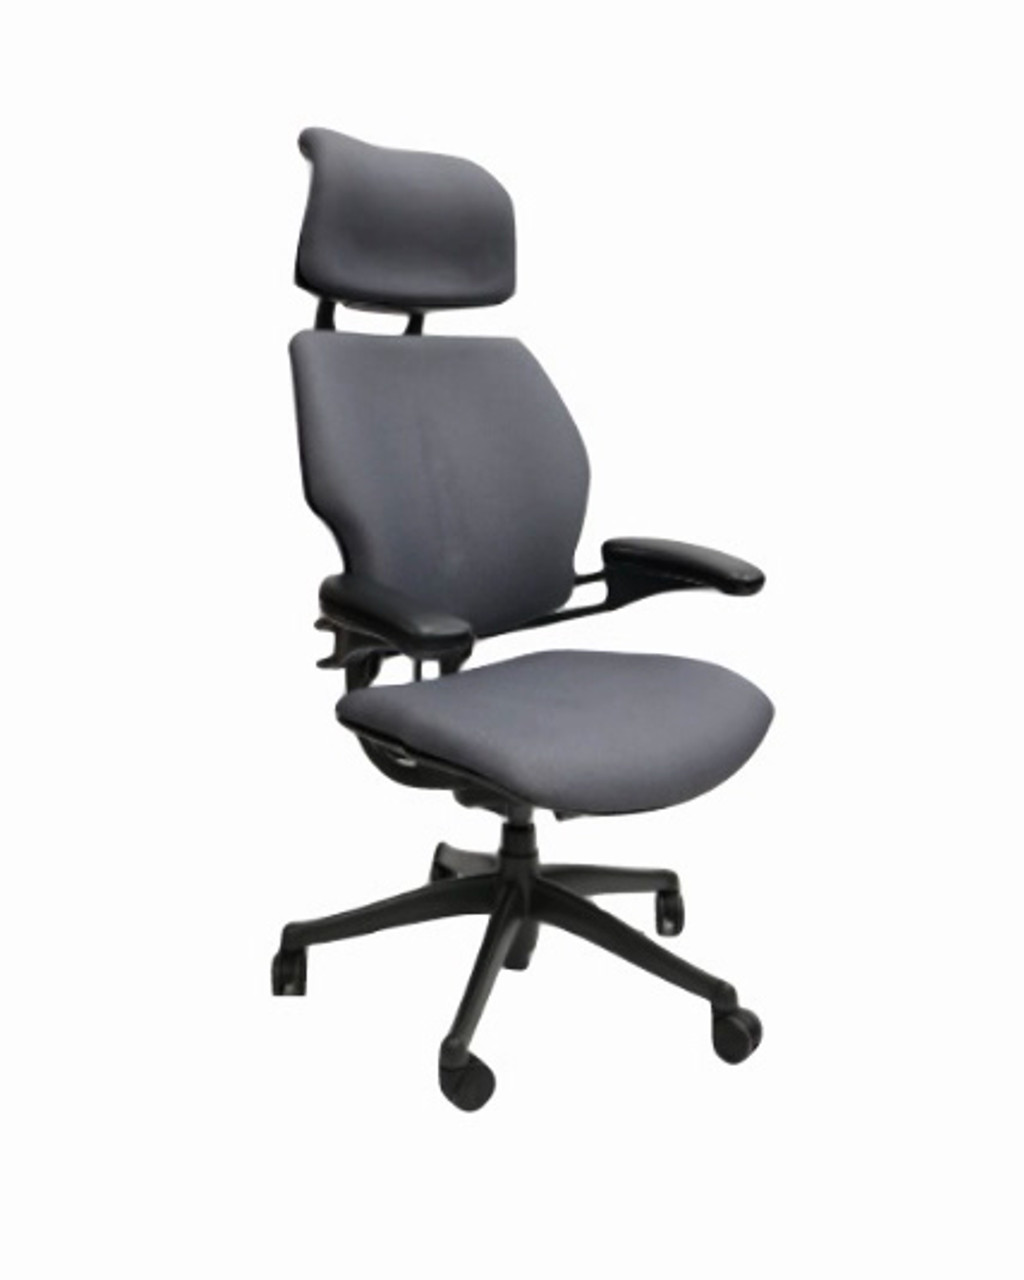 https://cdn11.bigcommerce.com/s-rb8ue6qv0m/images/stencil/1280x1280/products/2416/16000/Humanscale-Freedom-Chair-Headrest-Gray2__92700.1692371796.jpg?c=2